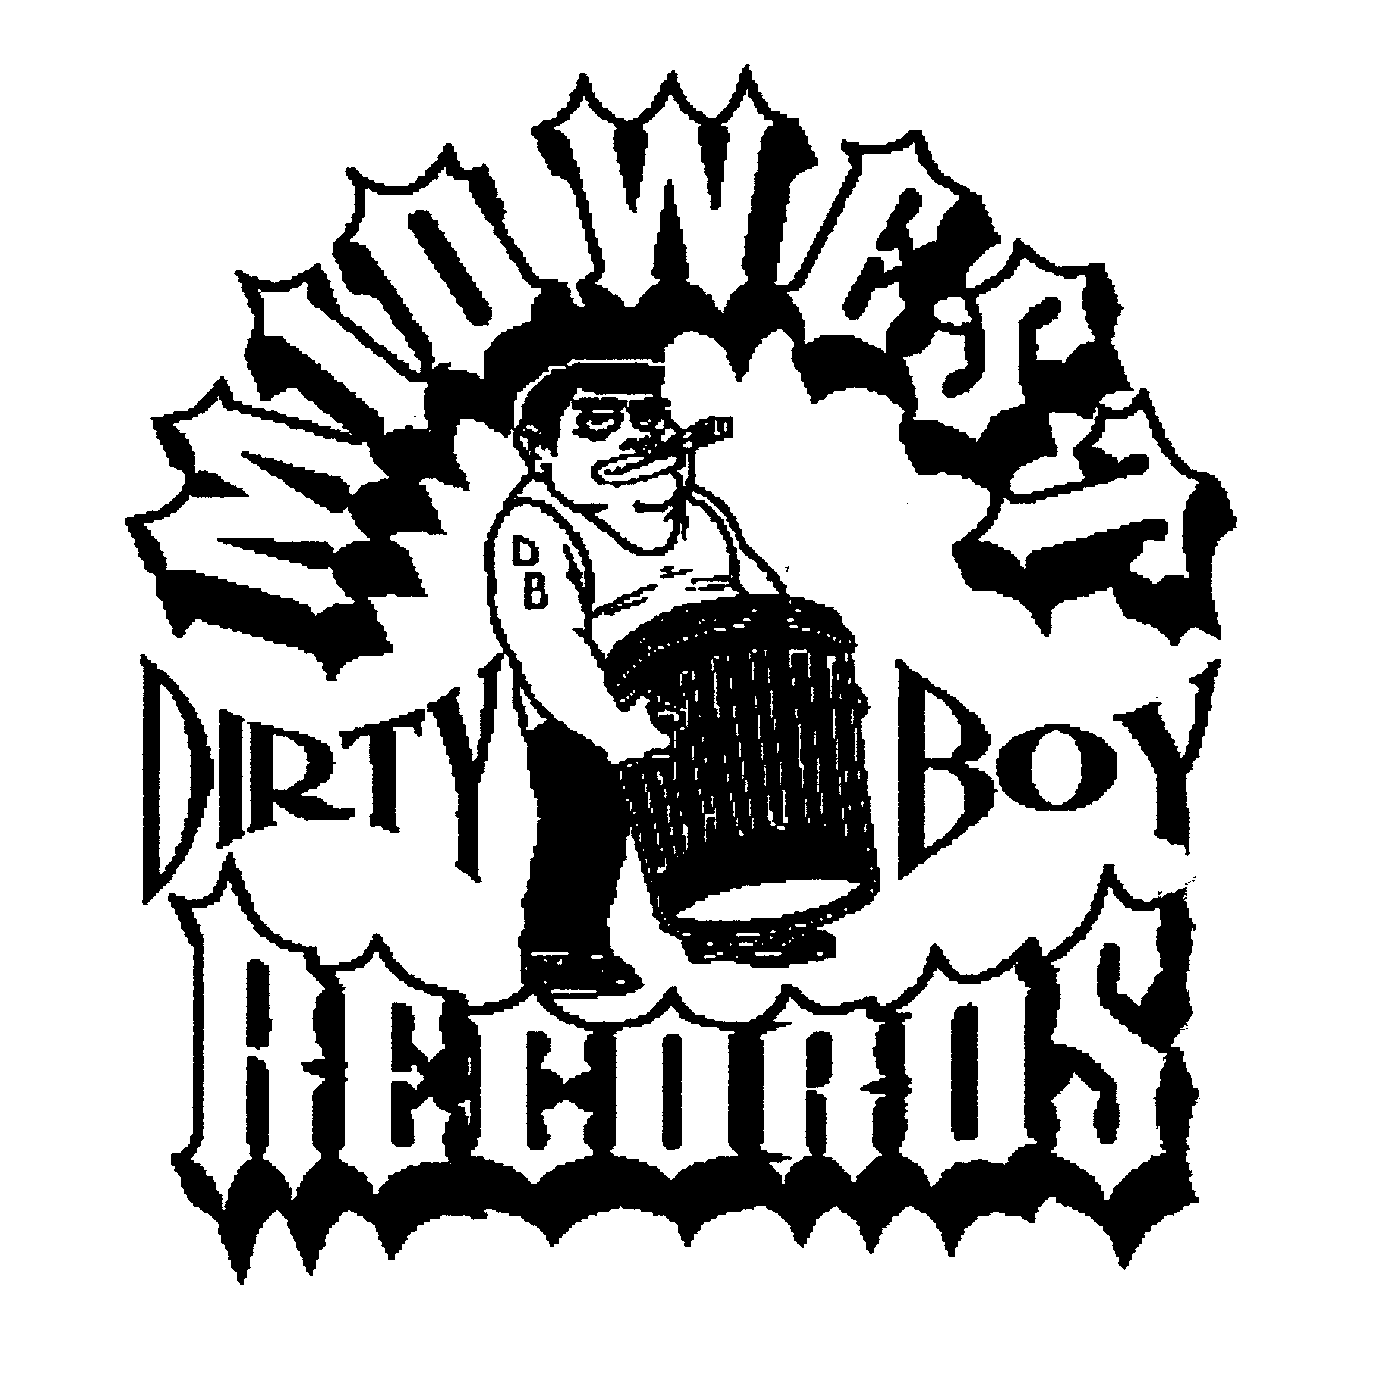  MIDWEST DIRTY BOY RECORDS